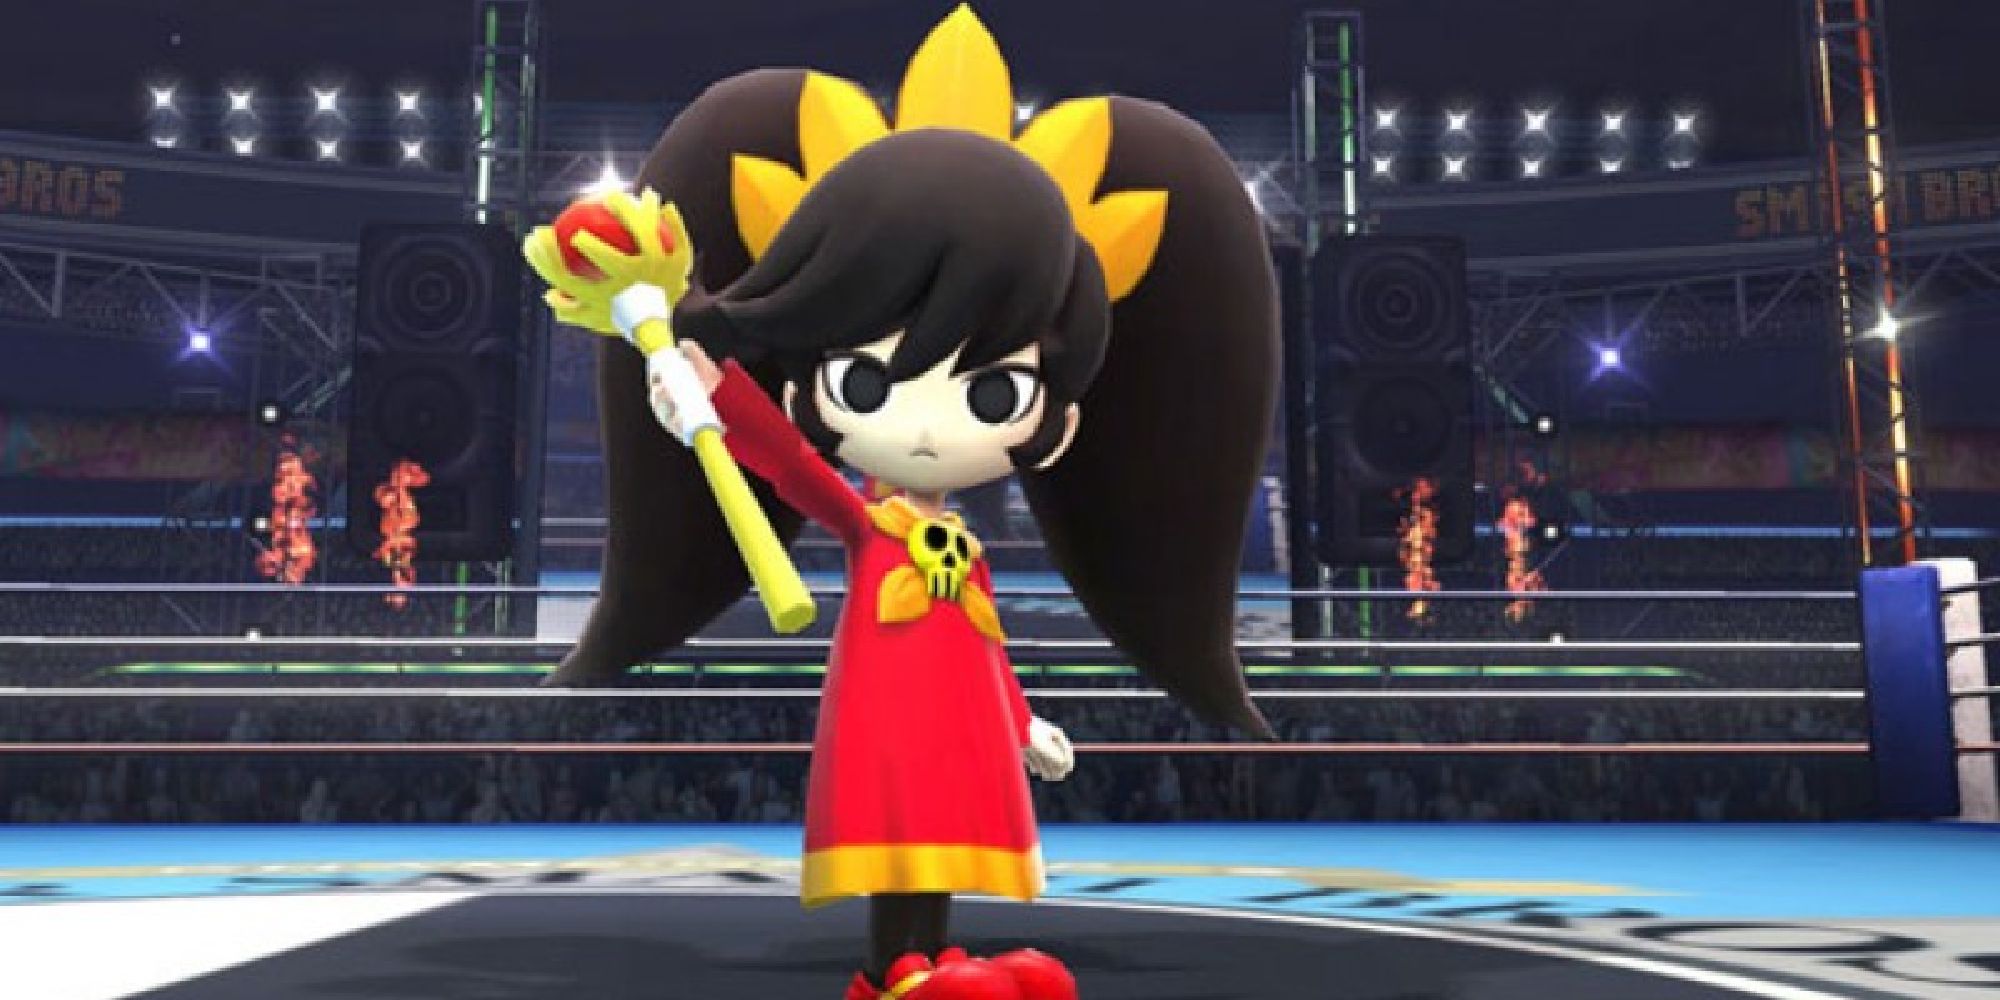 Ashley appearing as an assist trophy in Super Smash Bros for Wii U